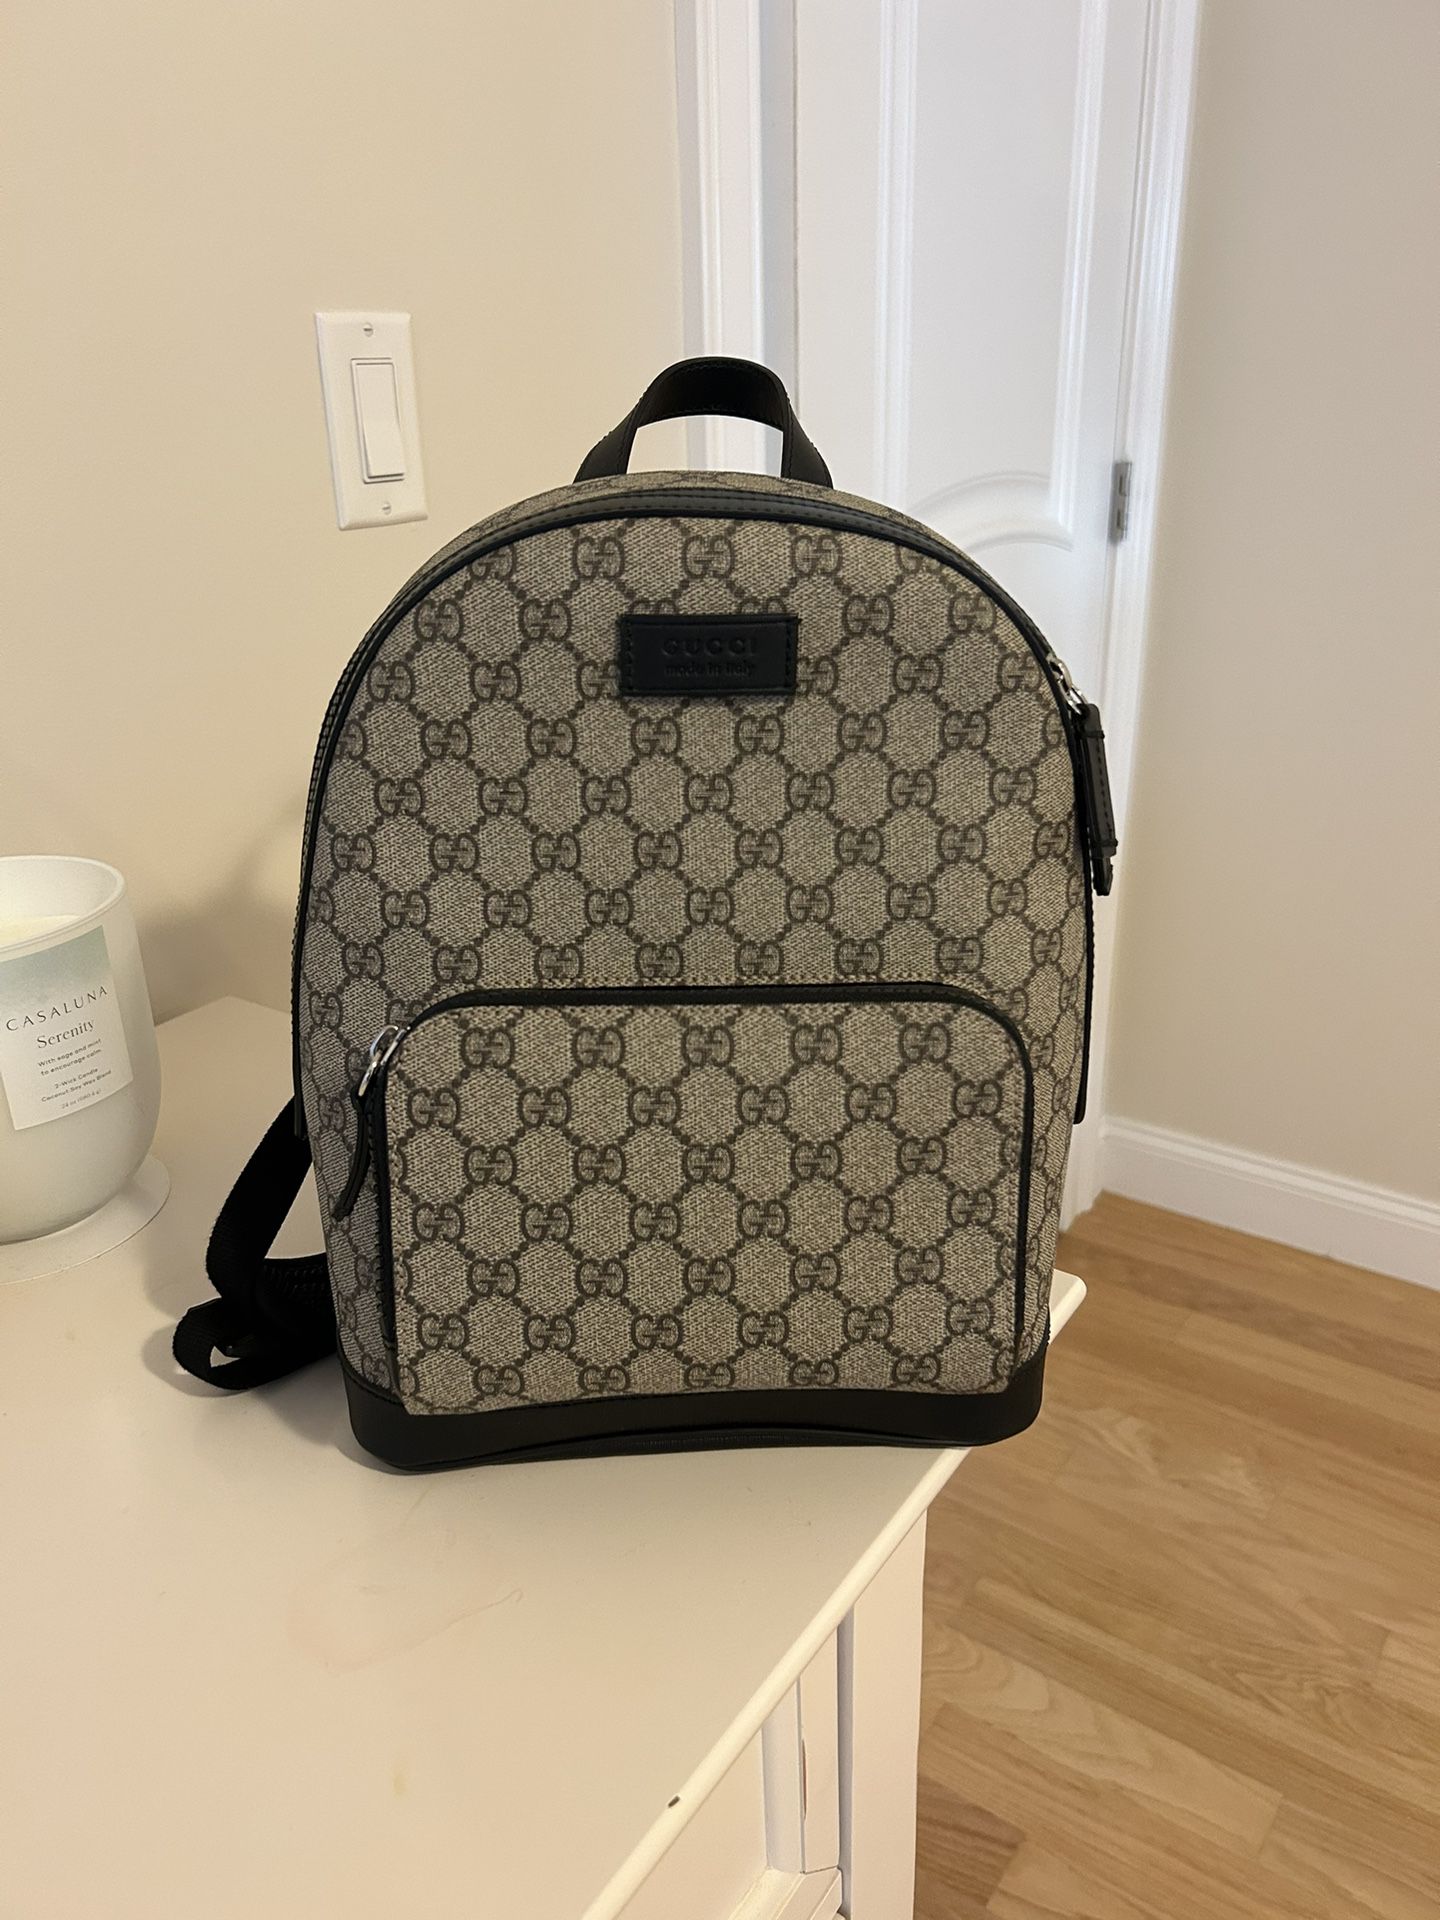 Authentic GUCCI Monogram Backpack